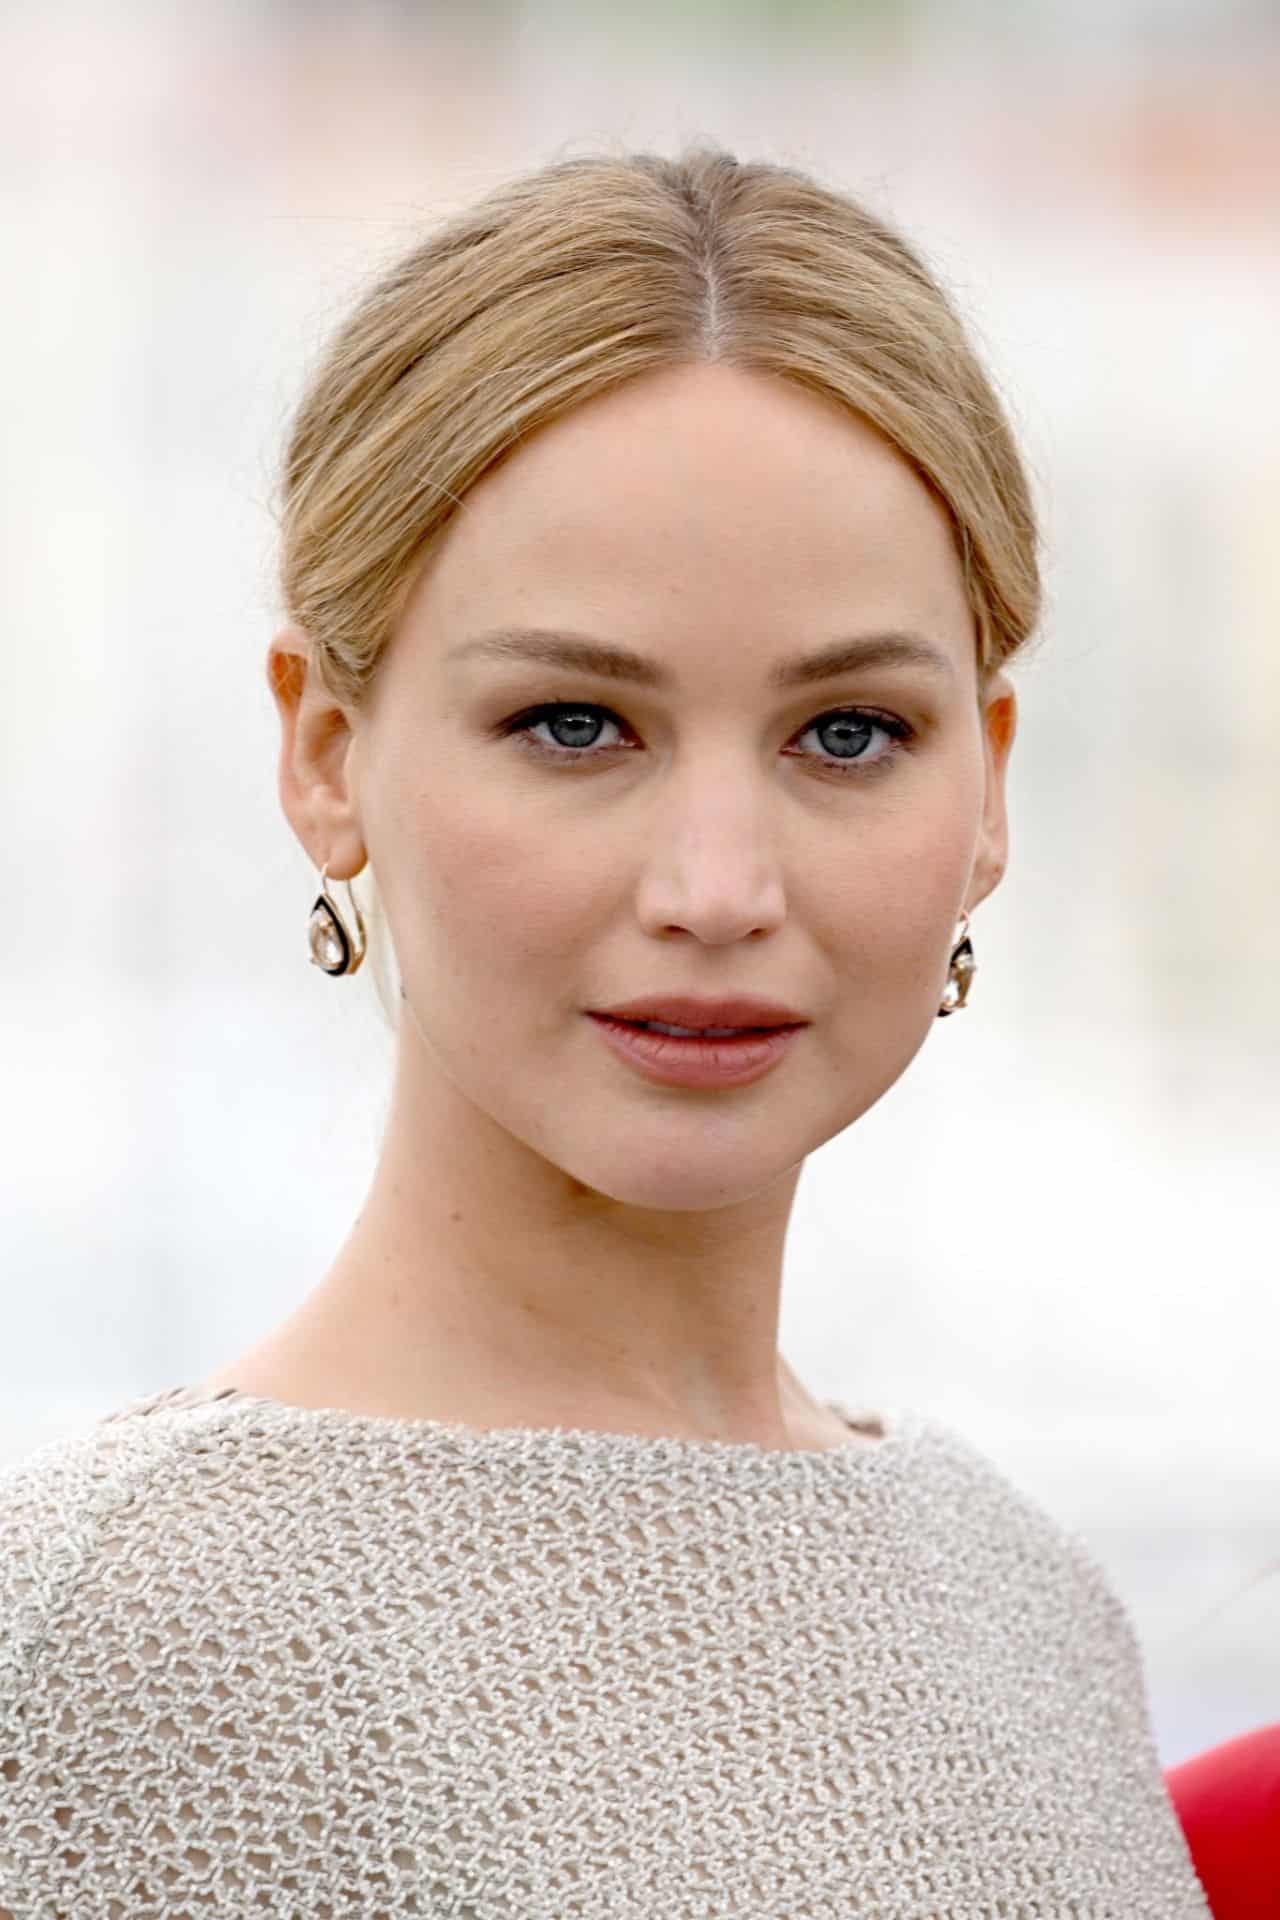 Jennifer Lawrence Brings the Heat in Crochet Dior Dress at Cannes